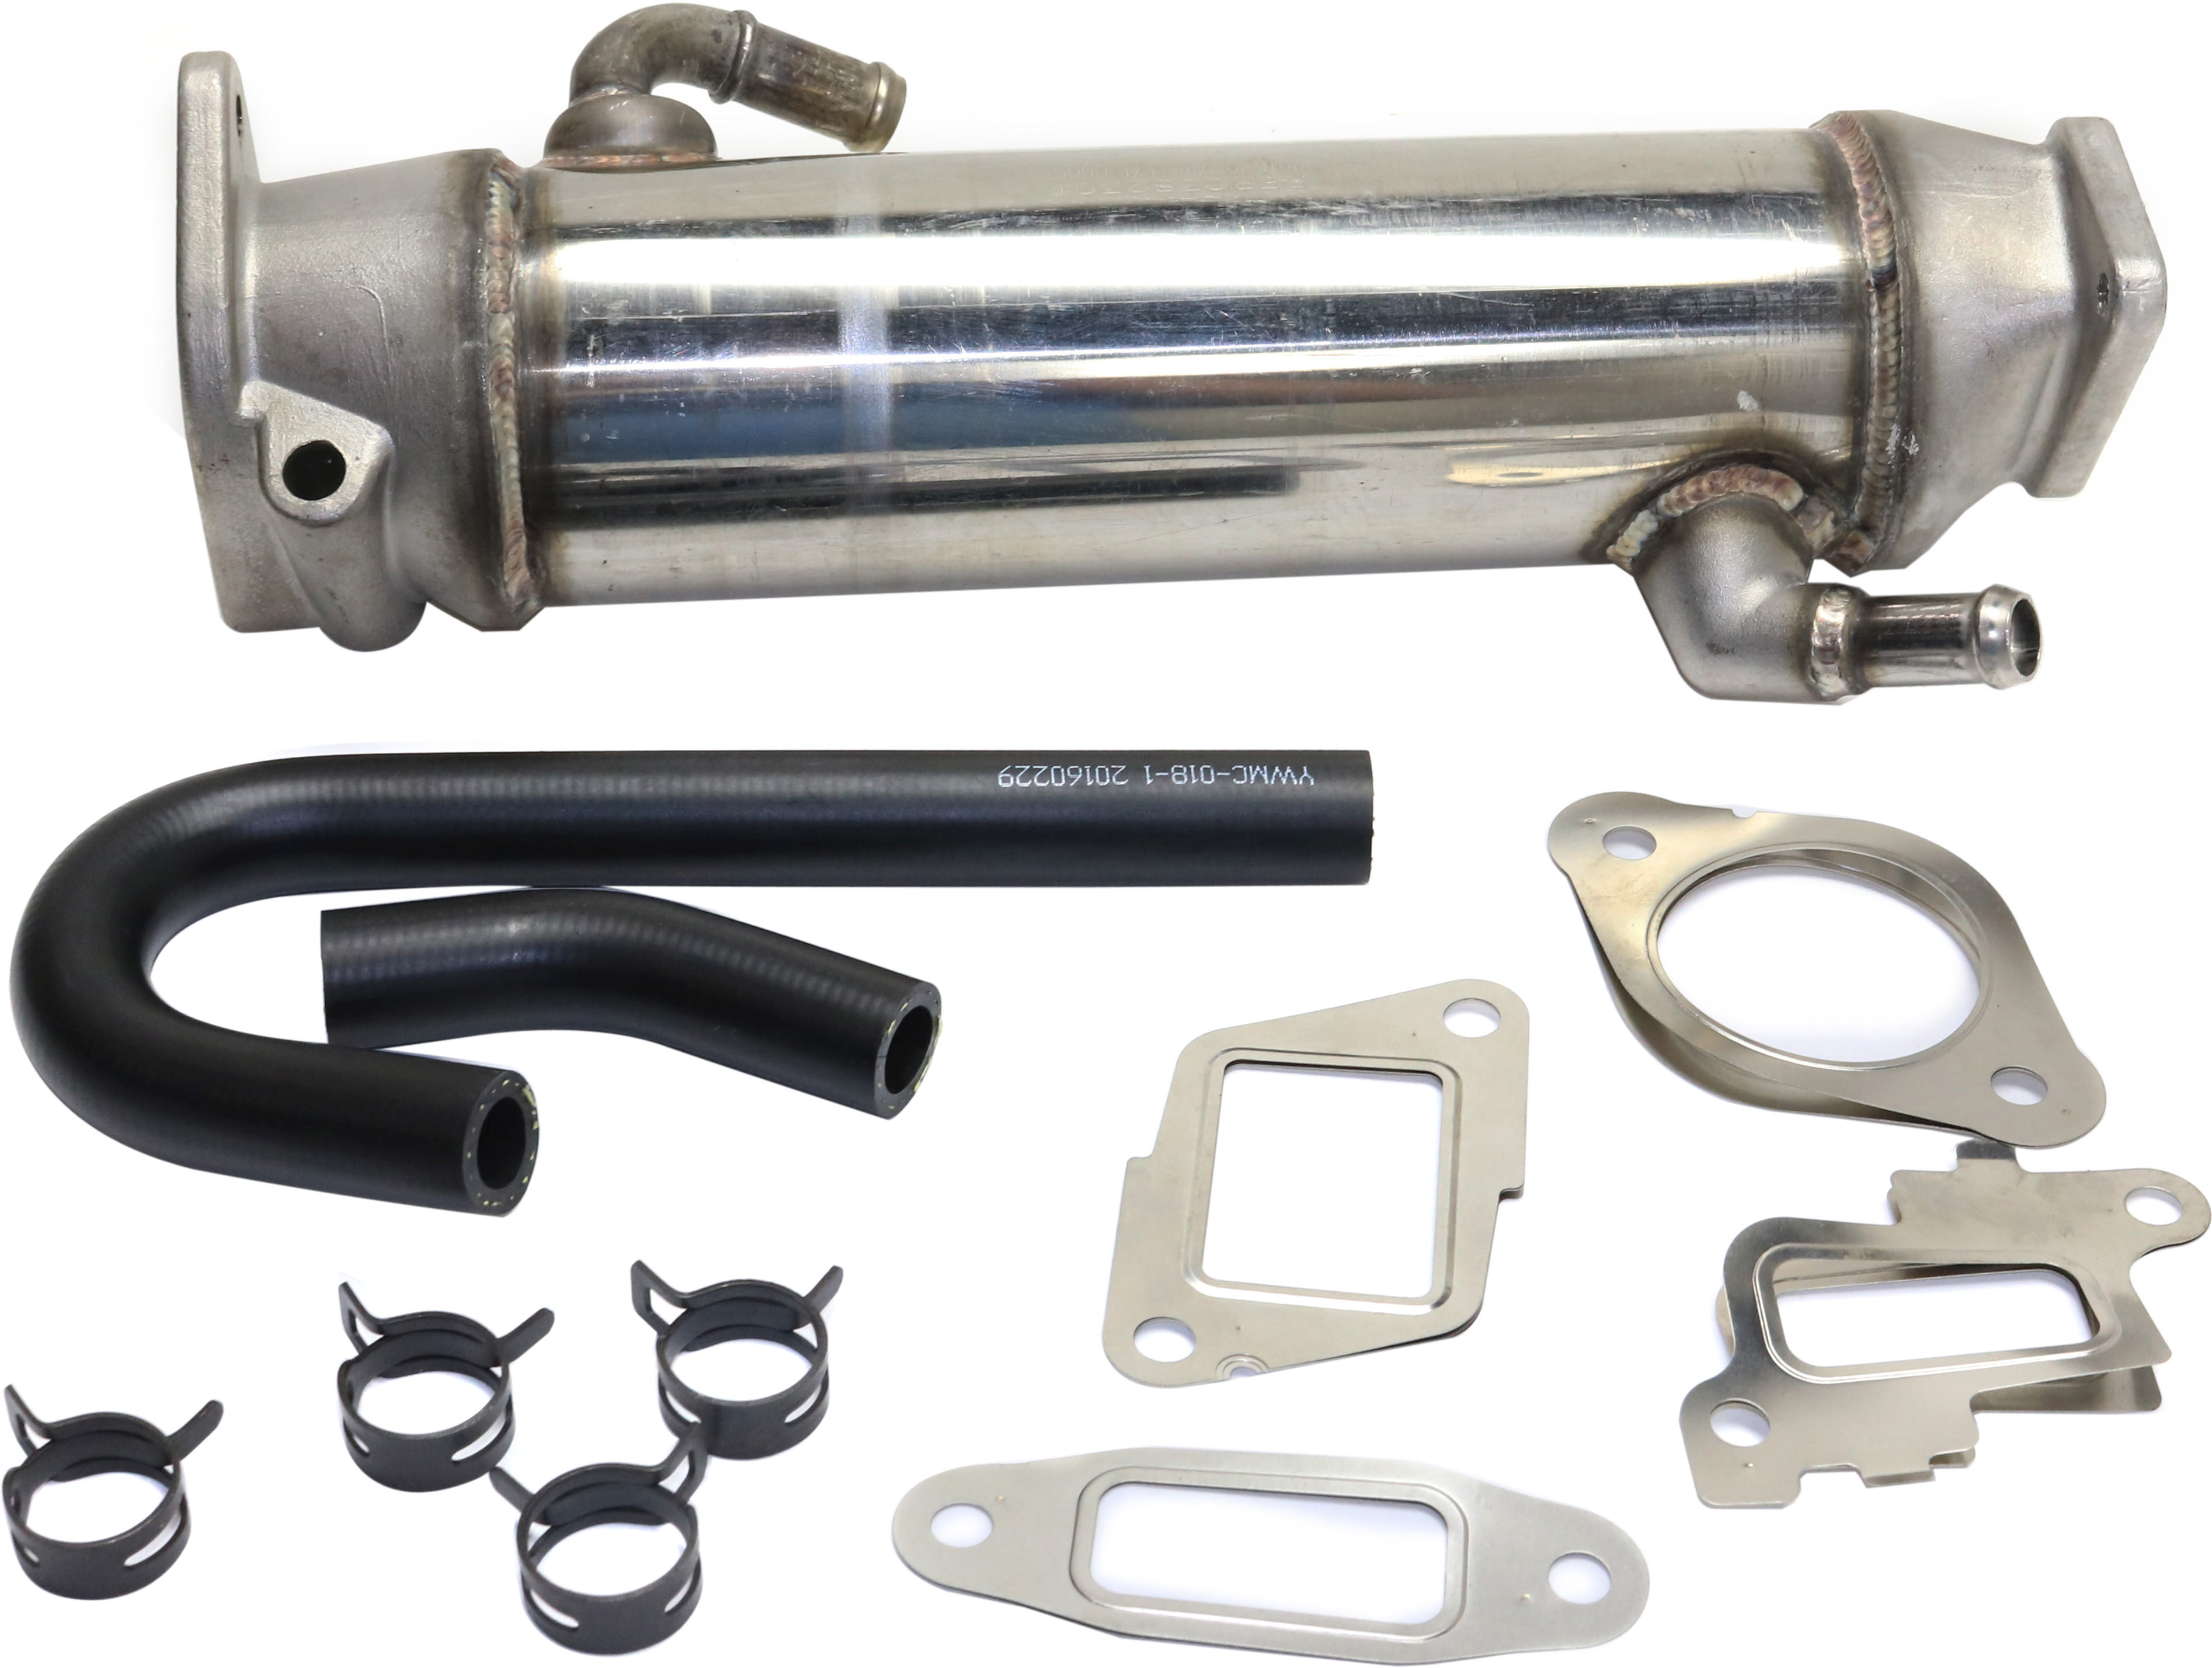 Replacement EGR Cooler Kit